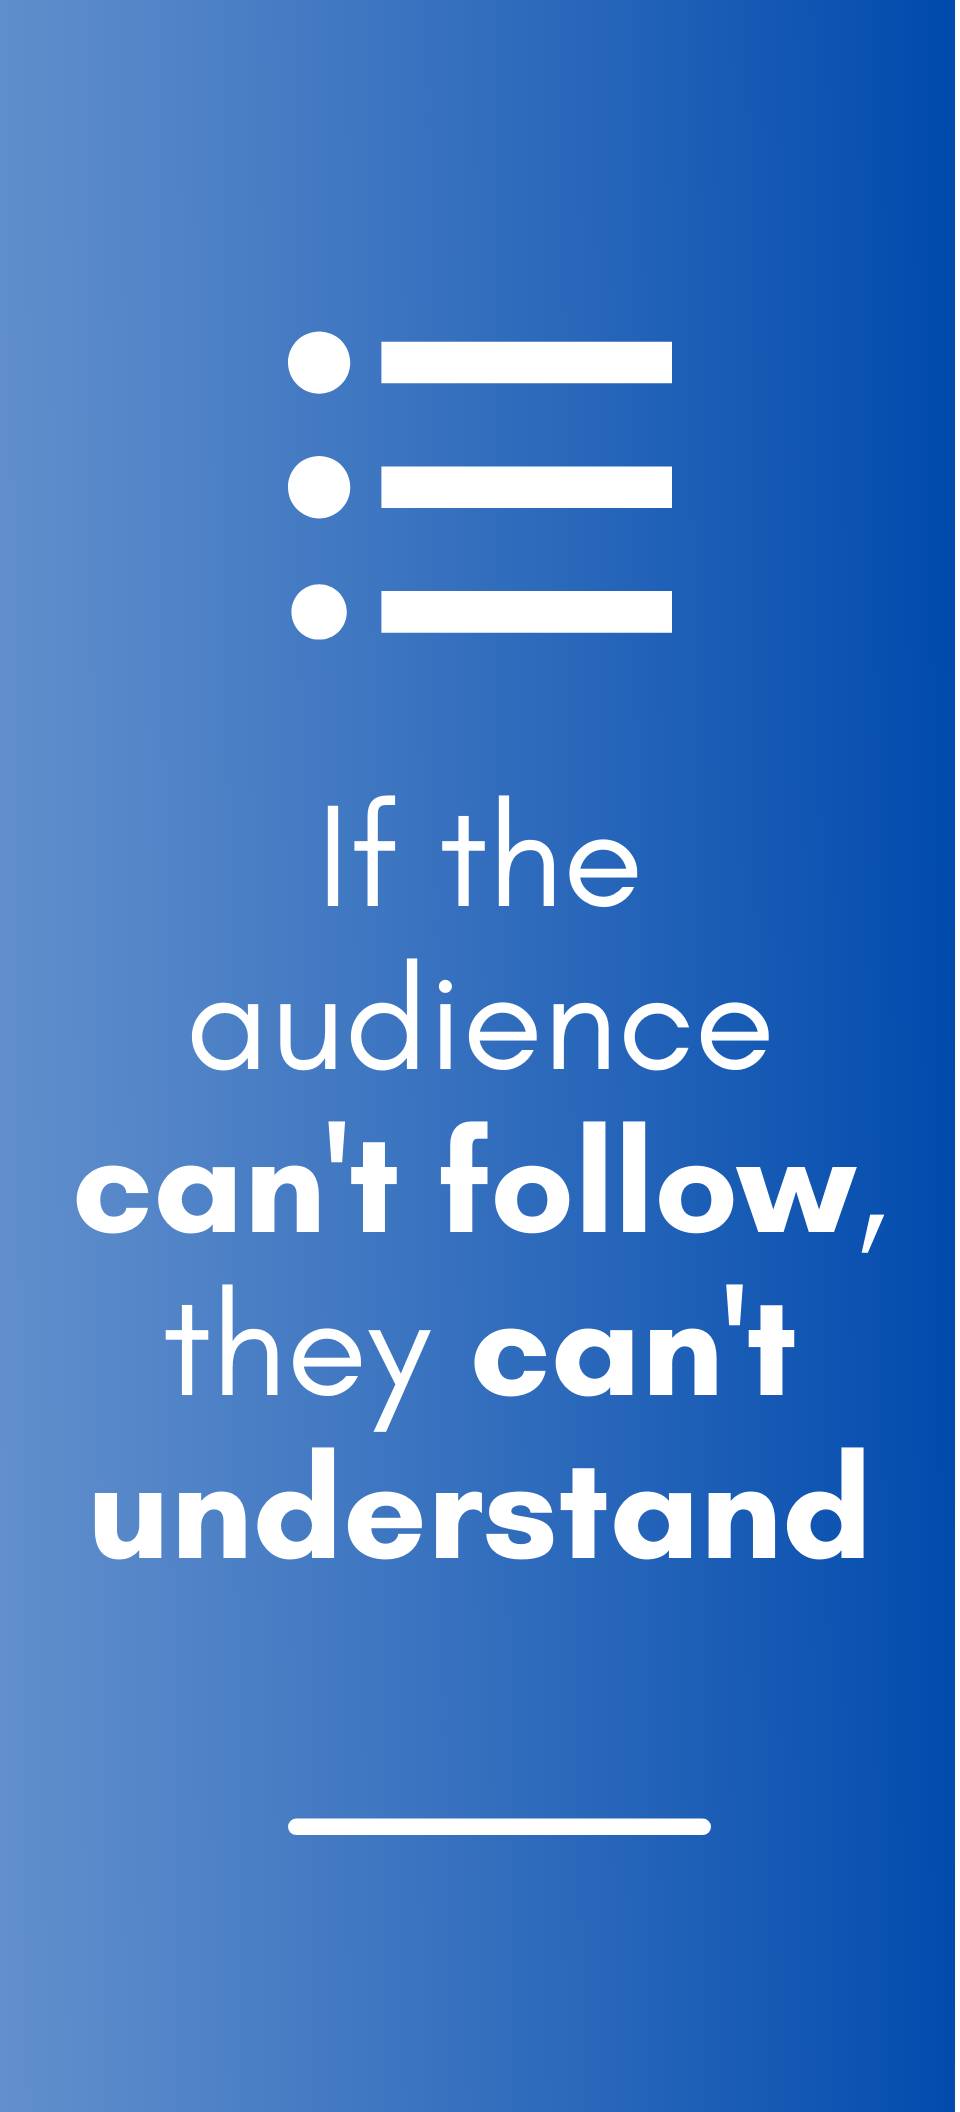 If the audience can't follow, they can't understand